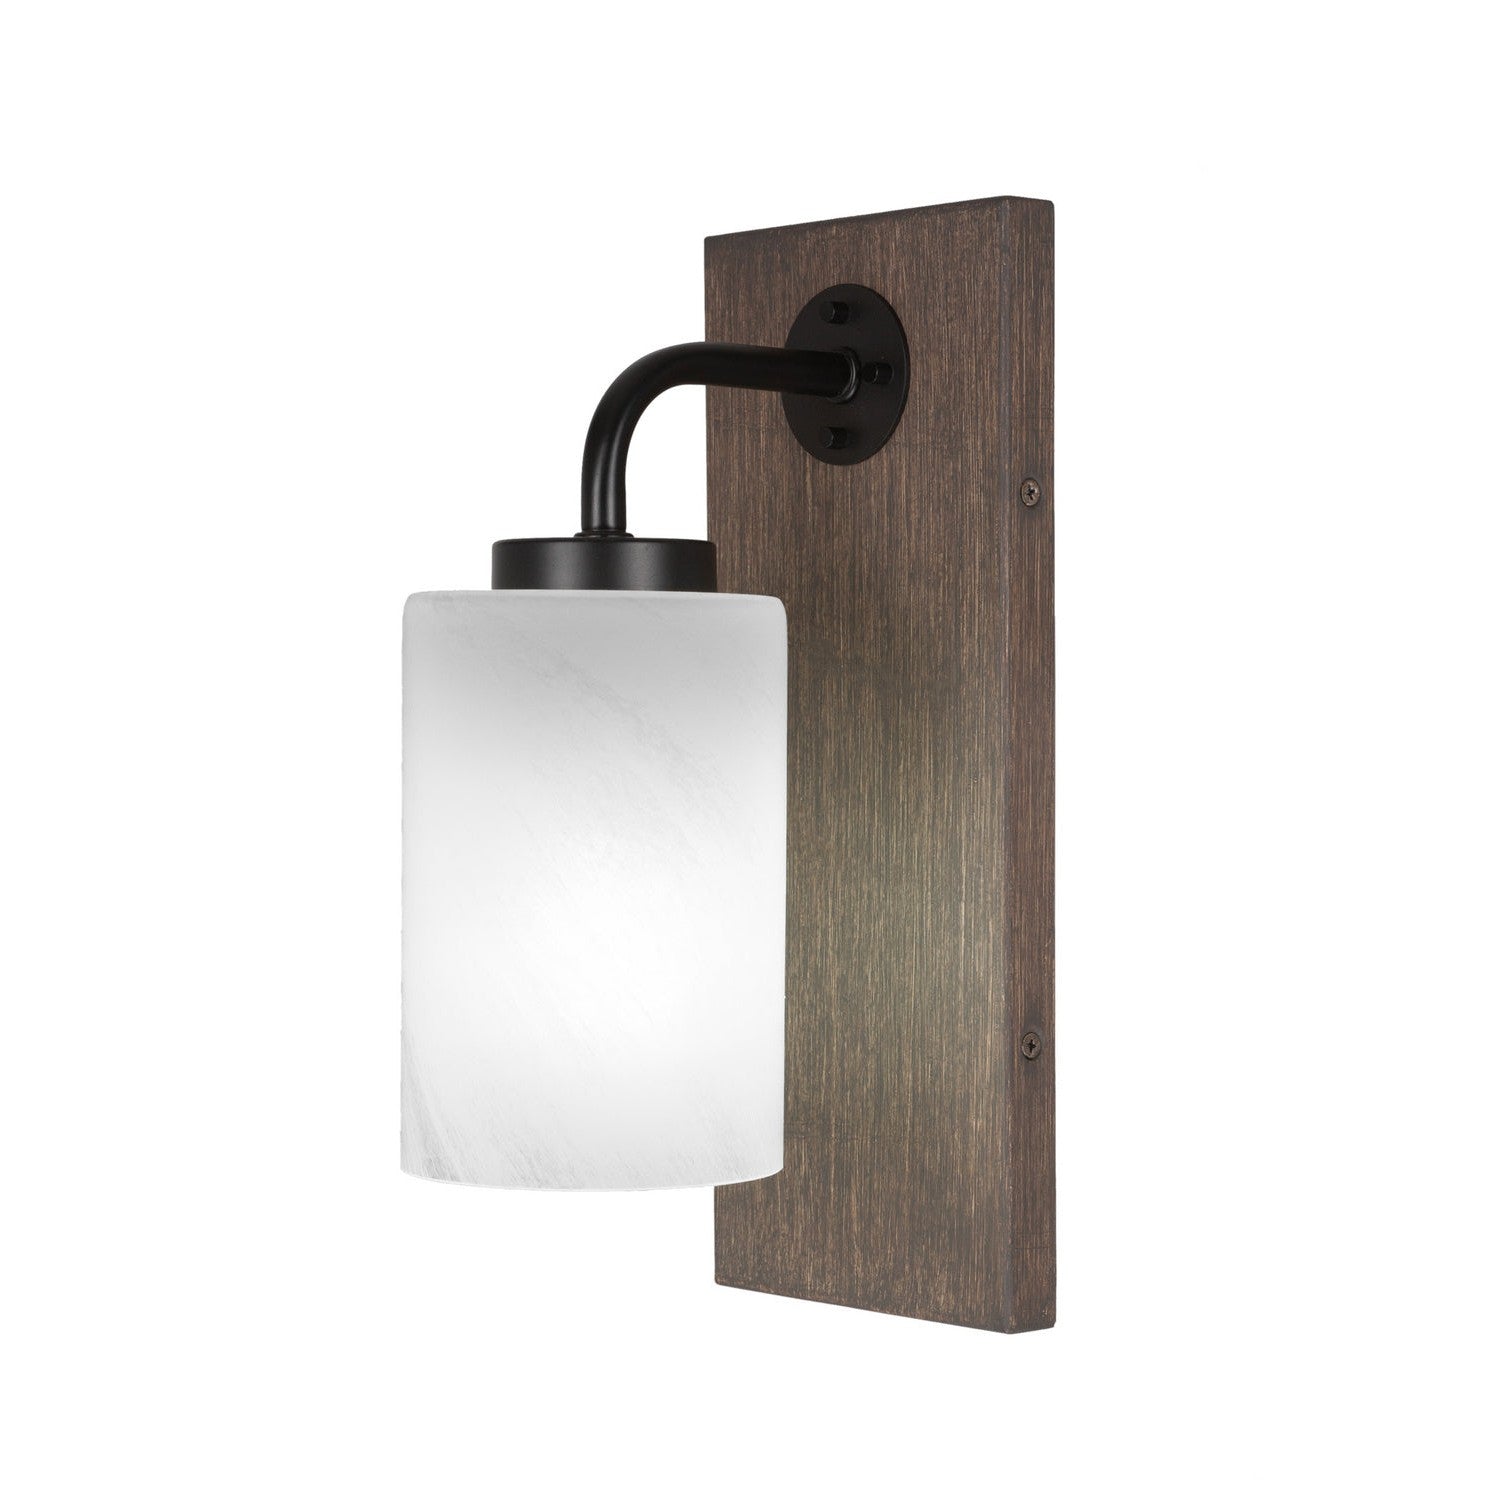 Toltec Oxbridge 1771-mbdw-3001 Wall Sconce Light - Matte Black & Painted Distressed Wood-look